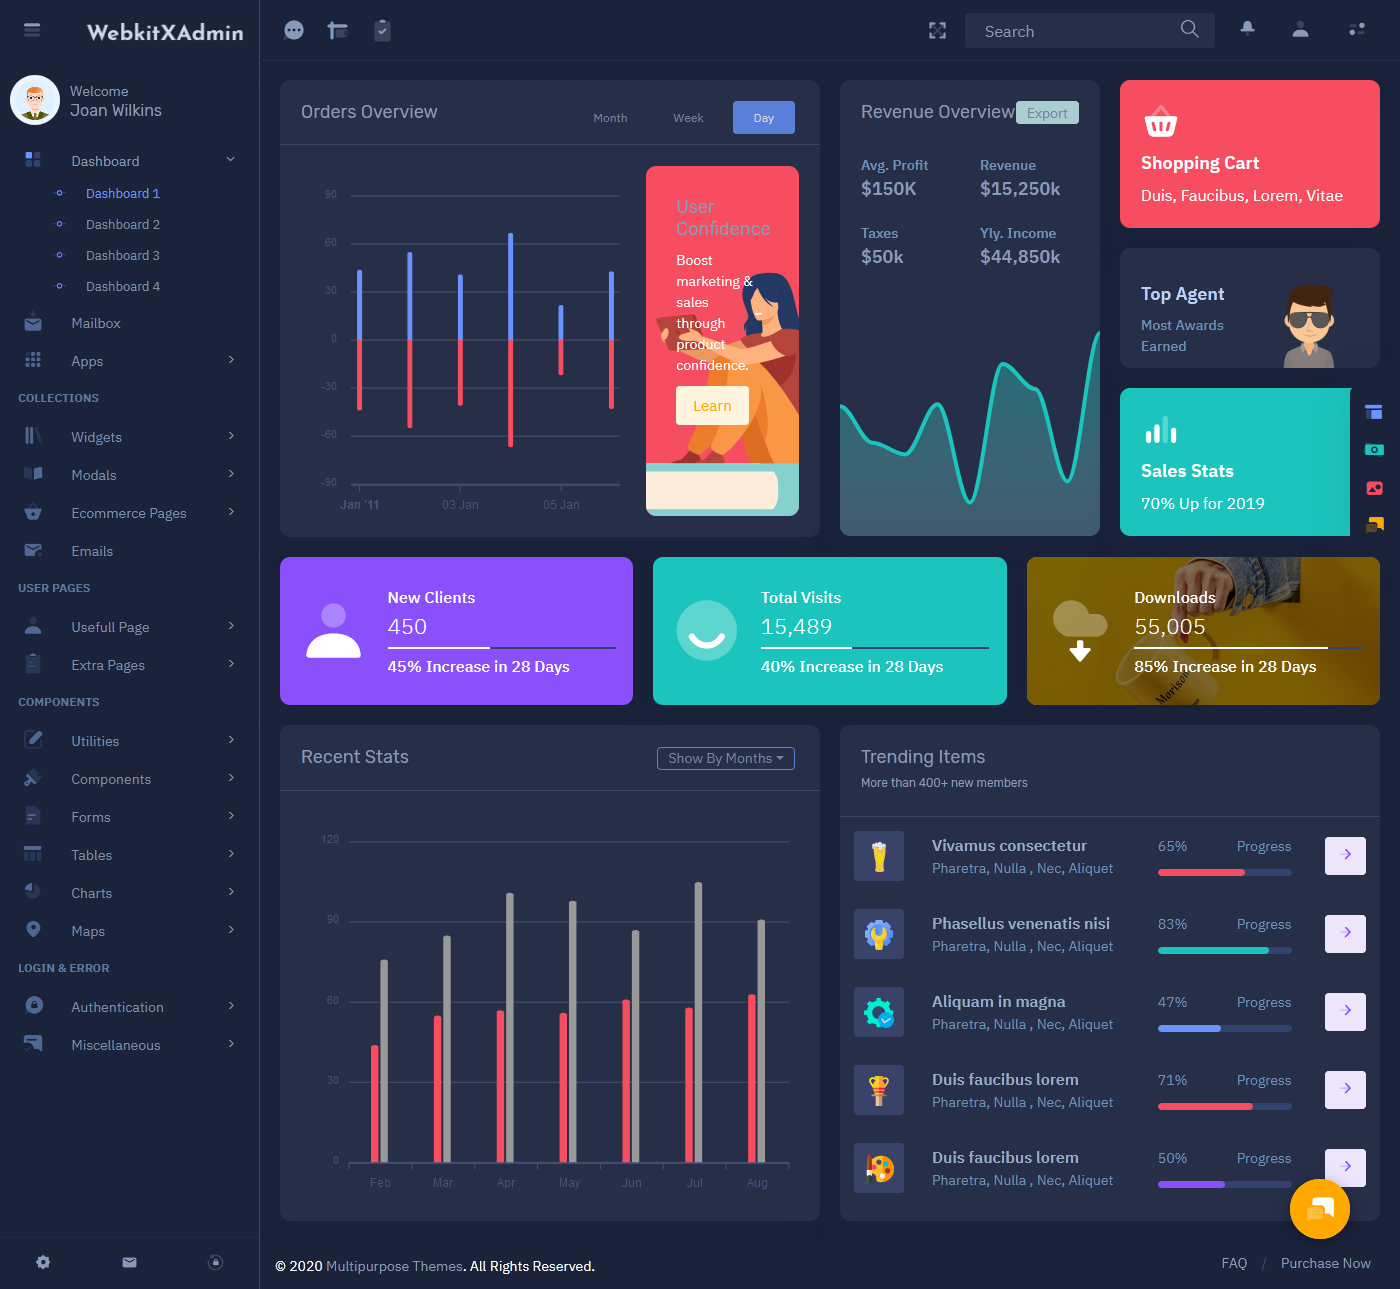 WebkitX - Bootstrap Admin Web App is a unique dashboard with features like Order, Revenue, Sales visits, monthly revenue, and performance tracking.